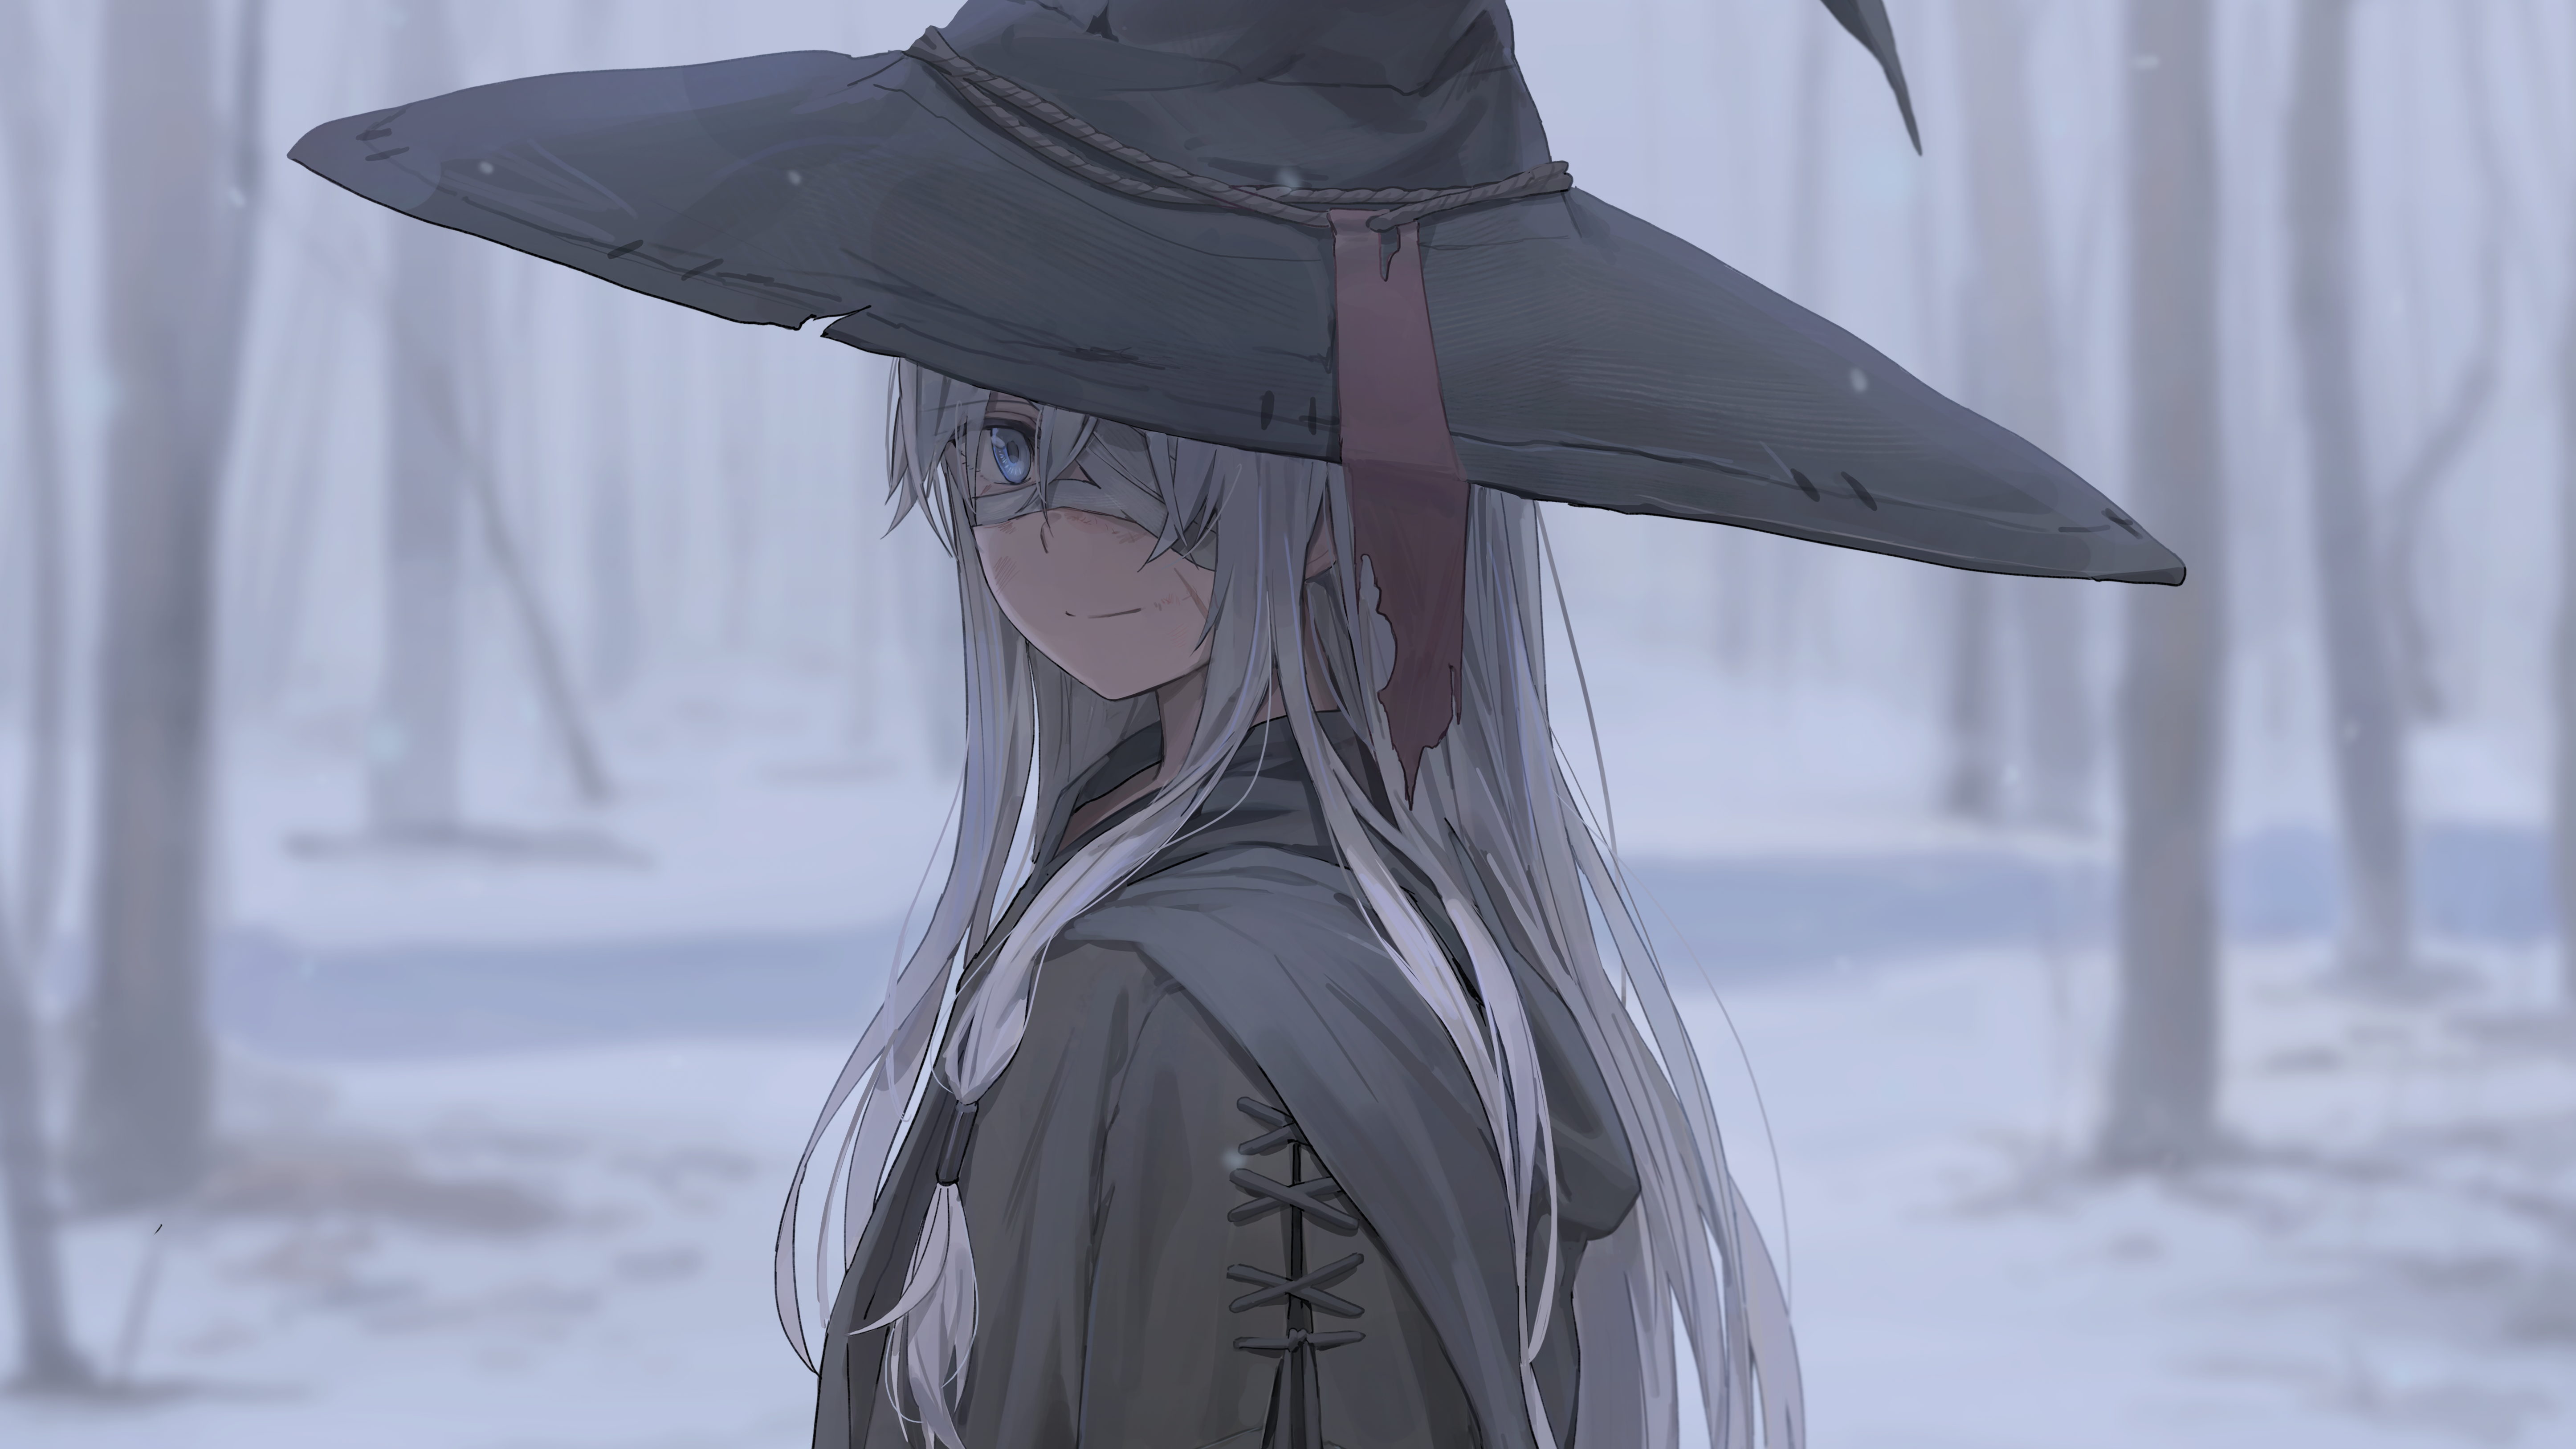 Witch Hat Gray Hair Blue Eyes Witch Hat Silver Hair Long Hair Anime Anime Girls Smiling Winter Depth 5784x3254